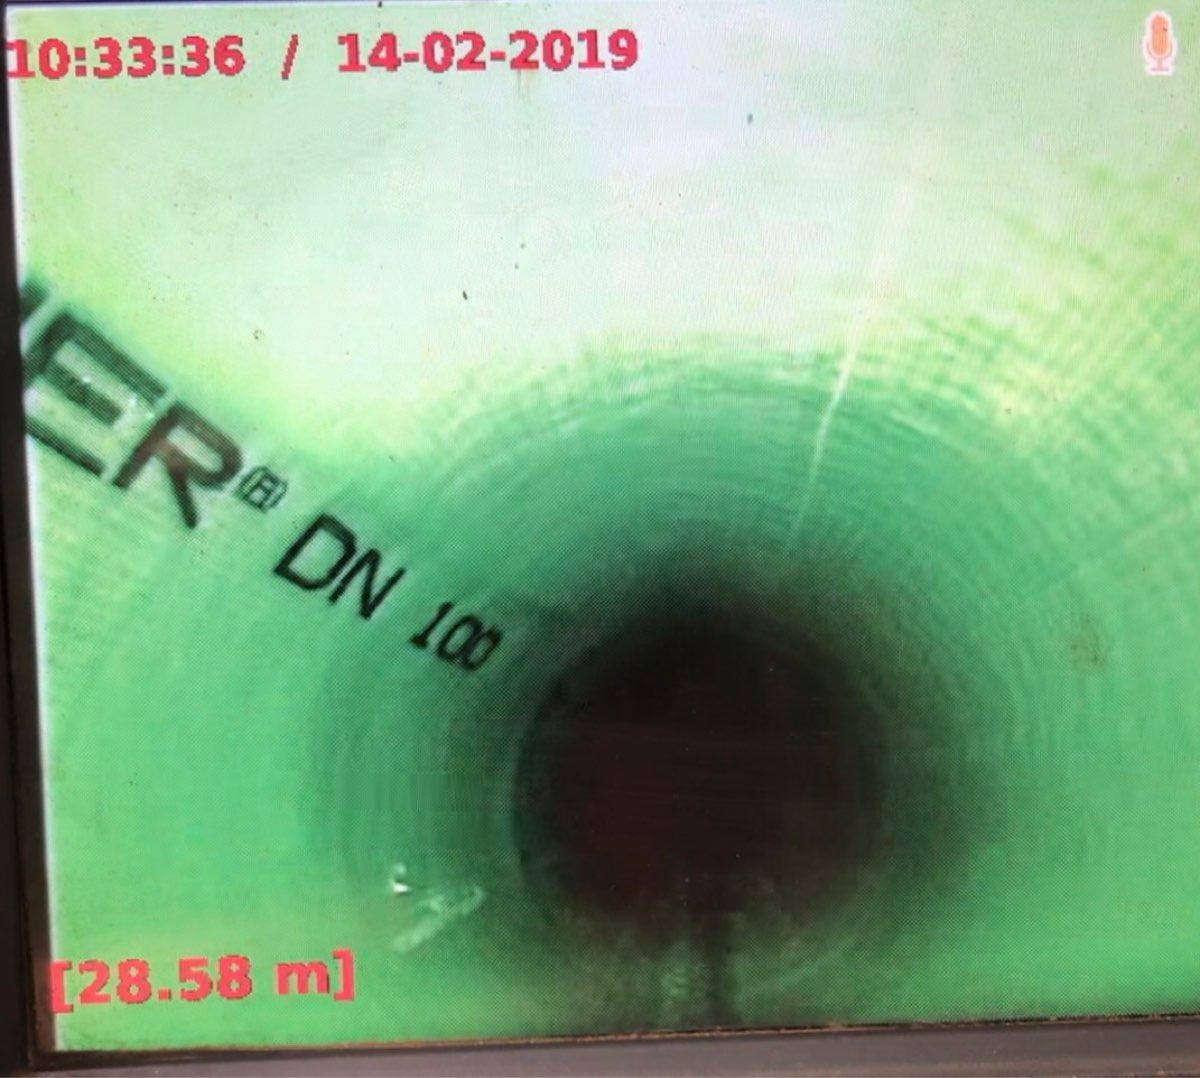 CCTV drain inspection of repaired pipe using pipe relining